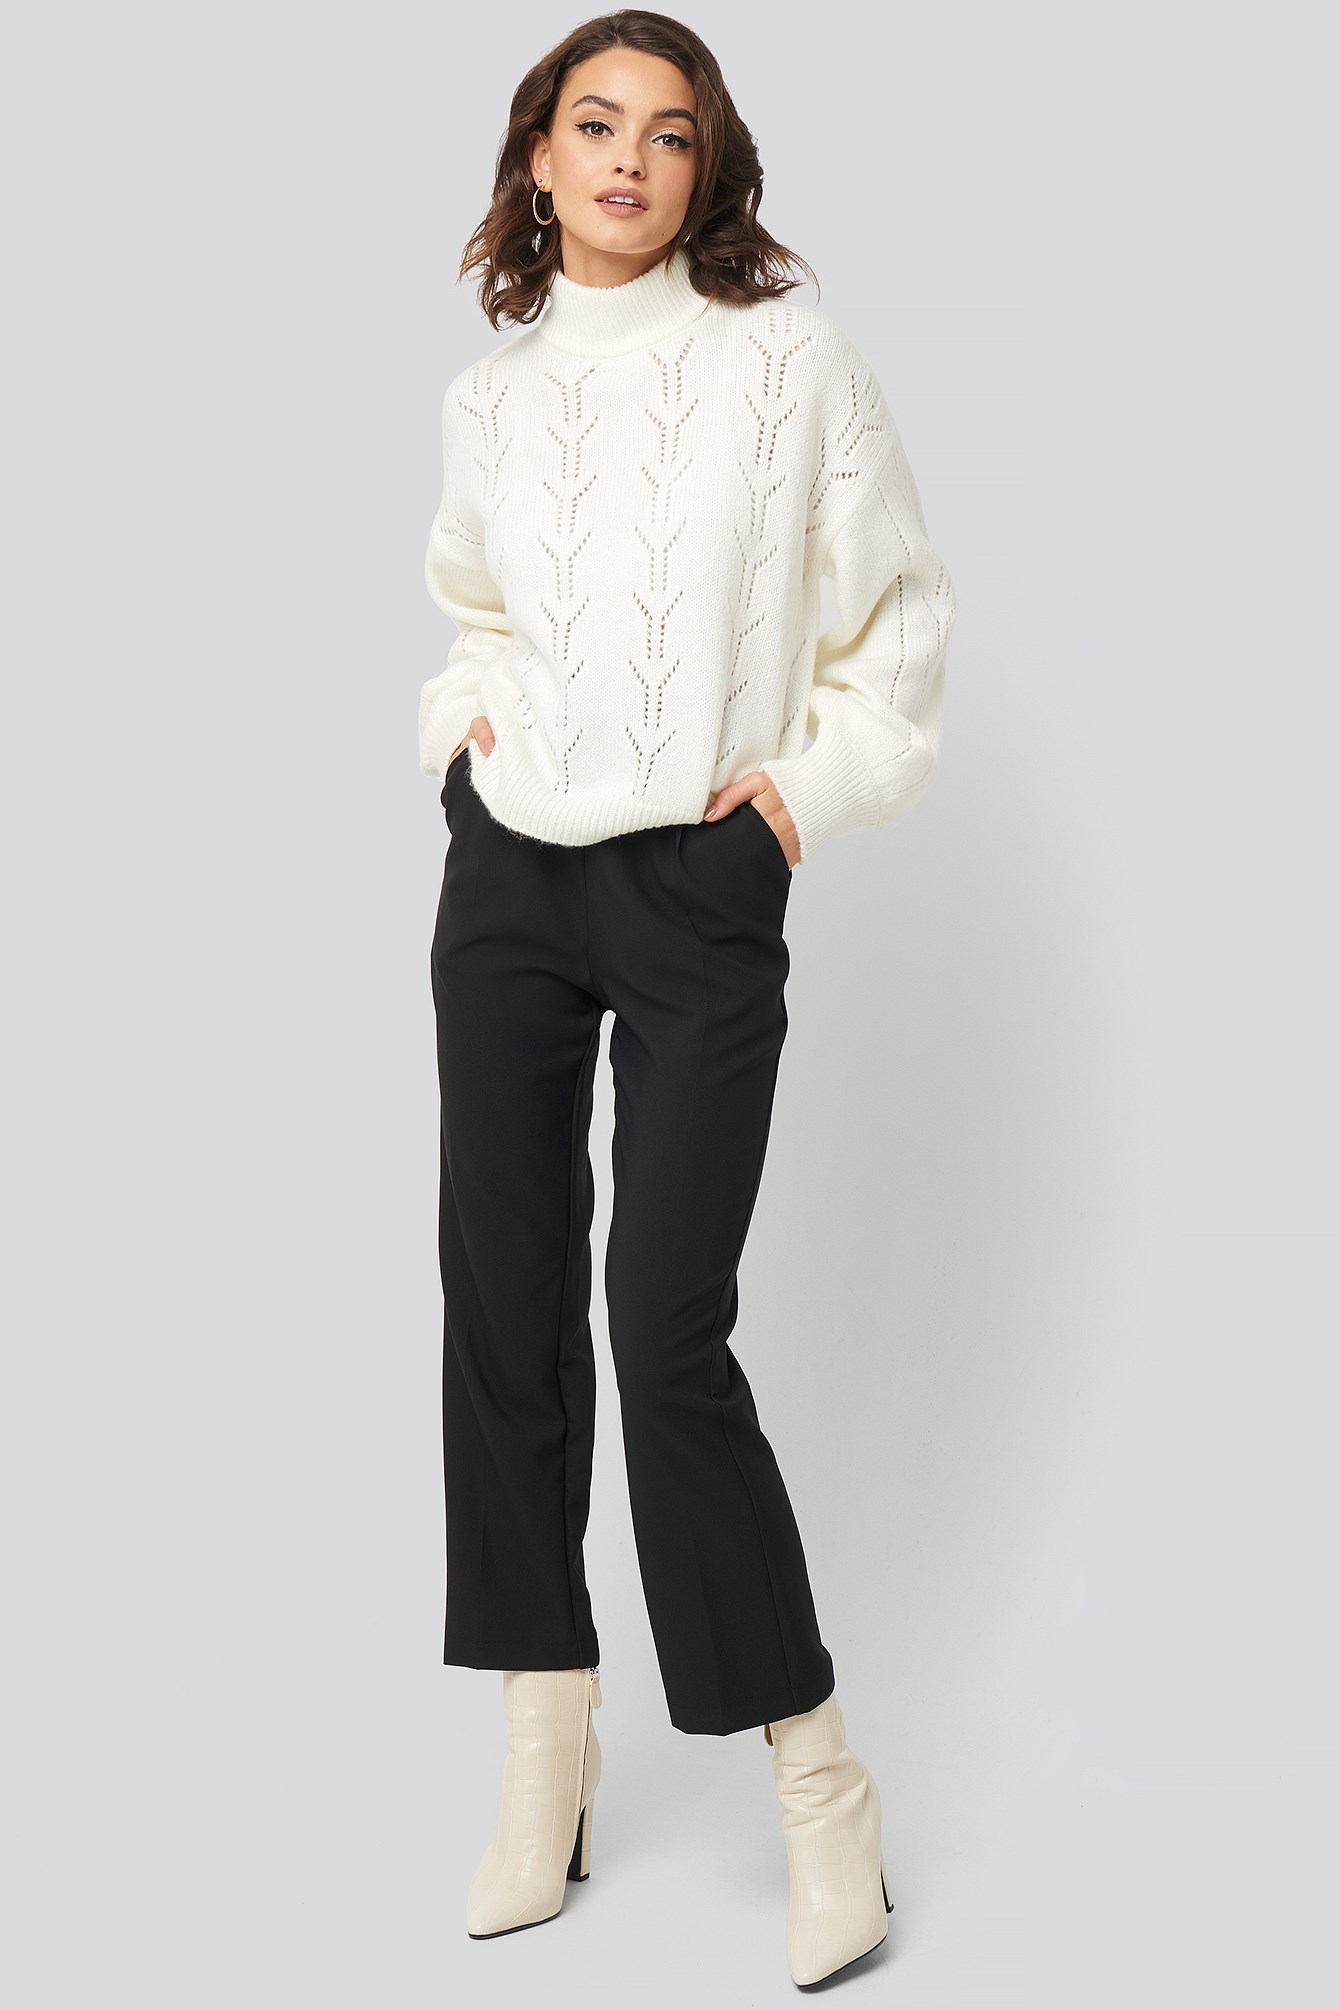 High Neck Balloon Sleeve Knitted Sweater White Outfit